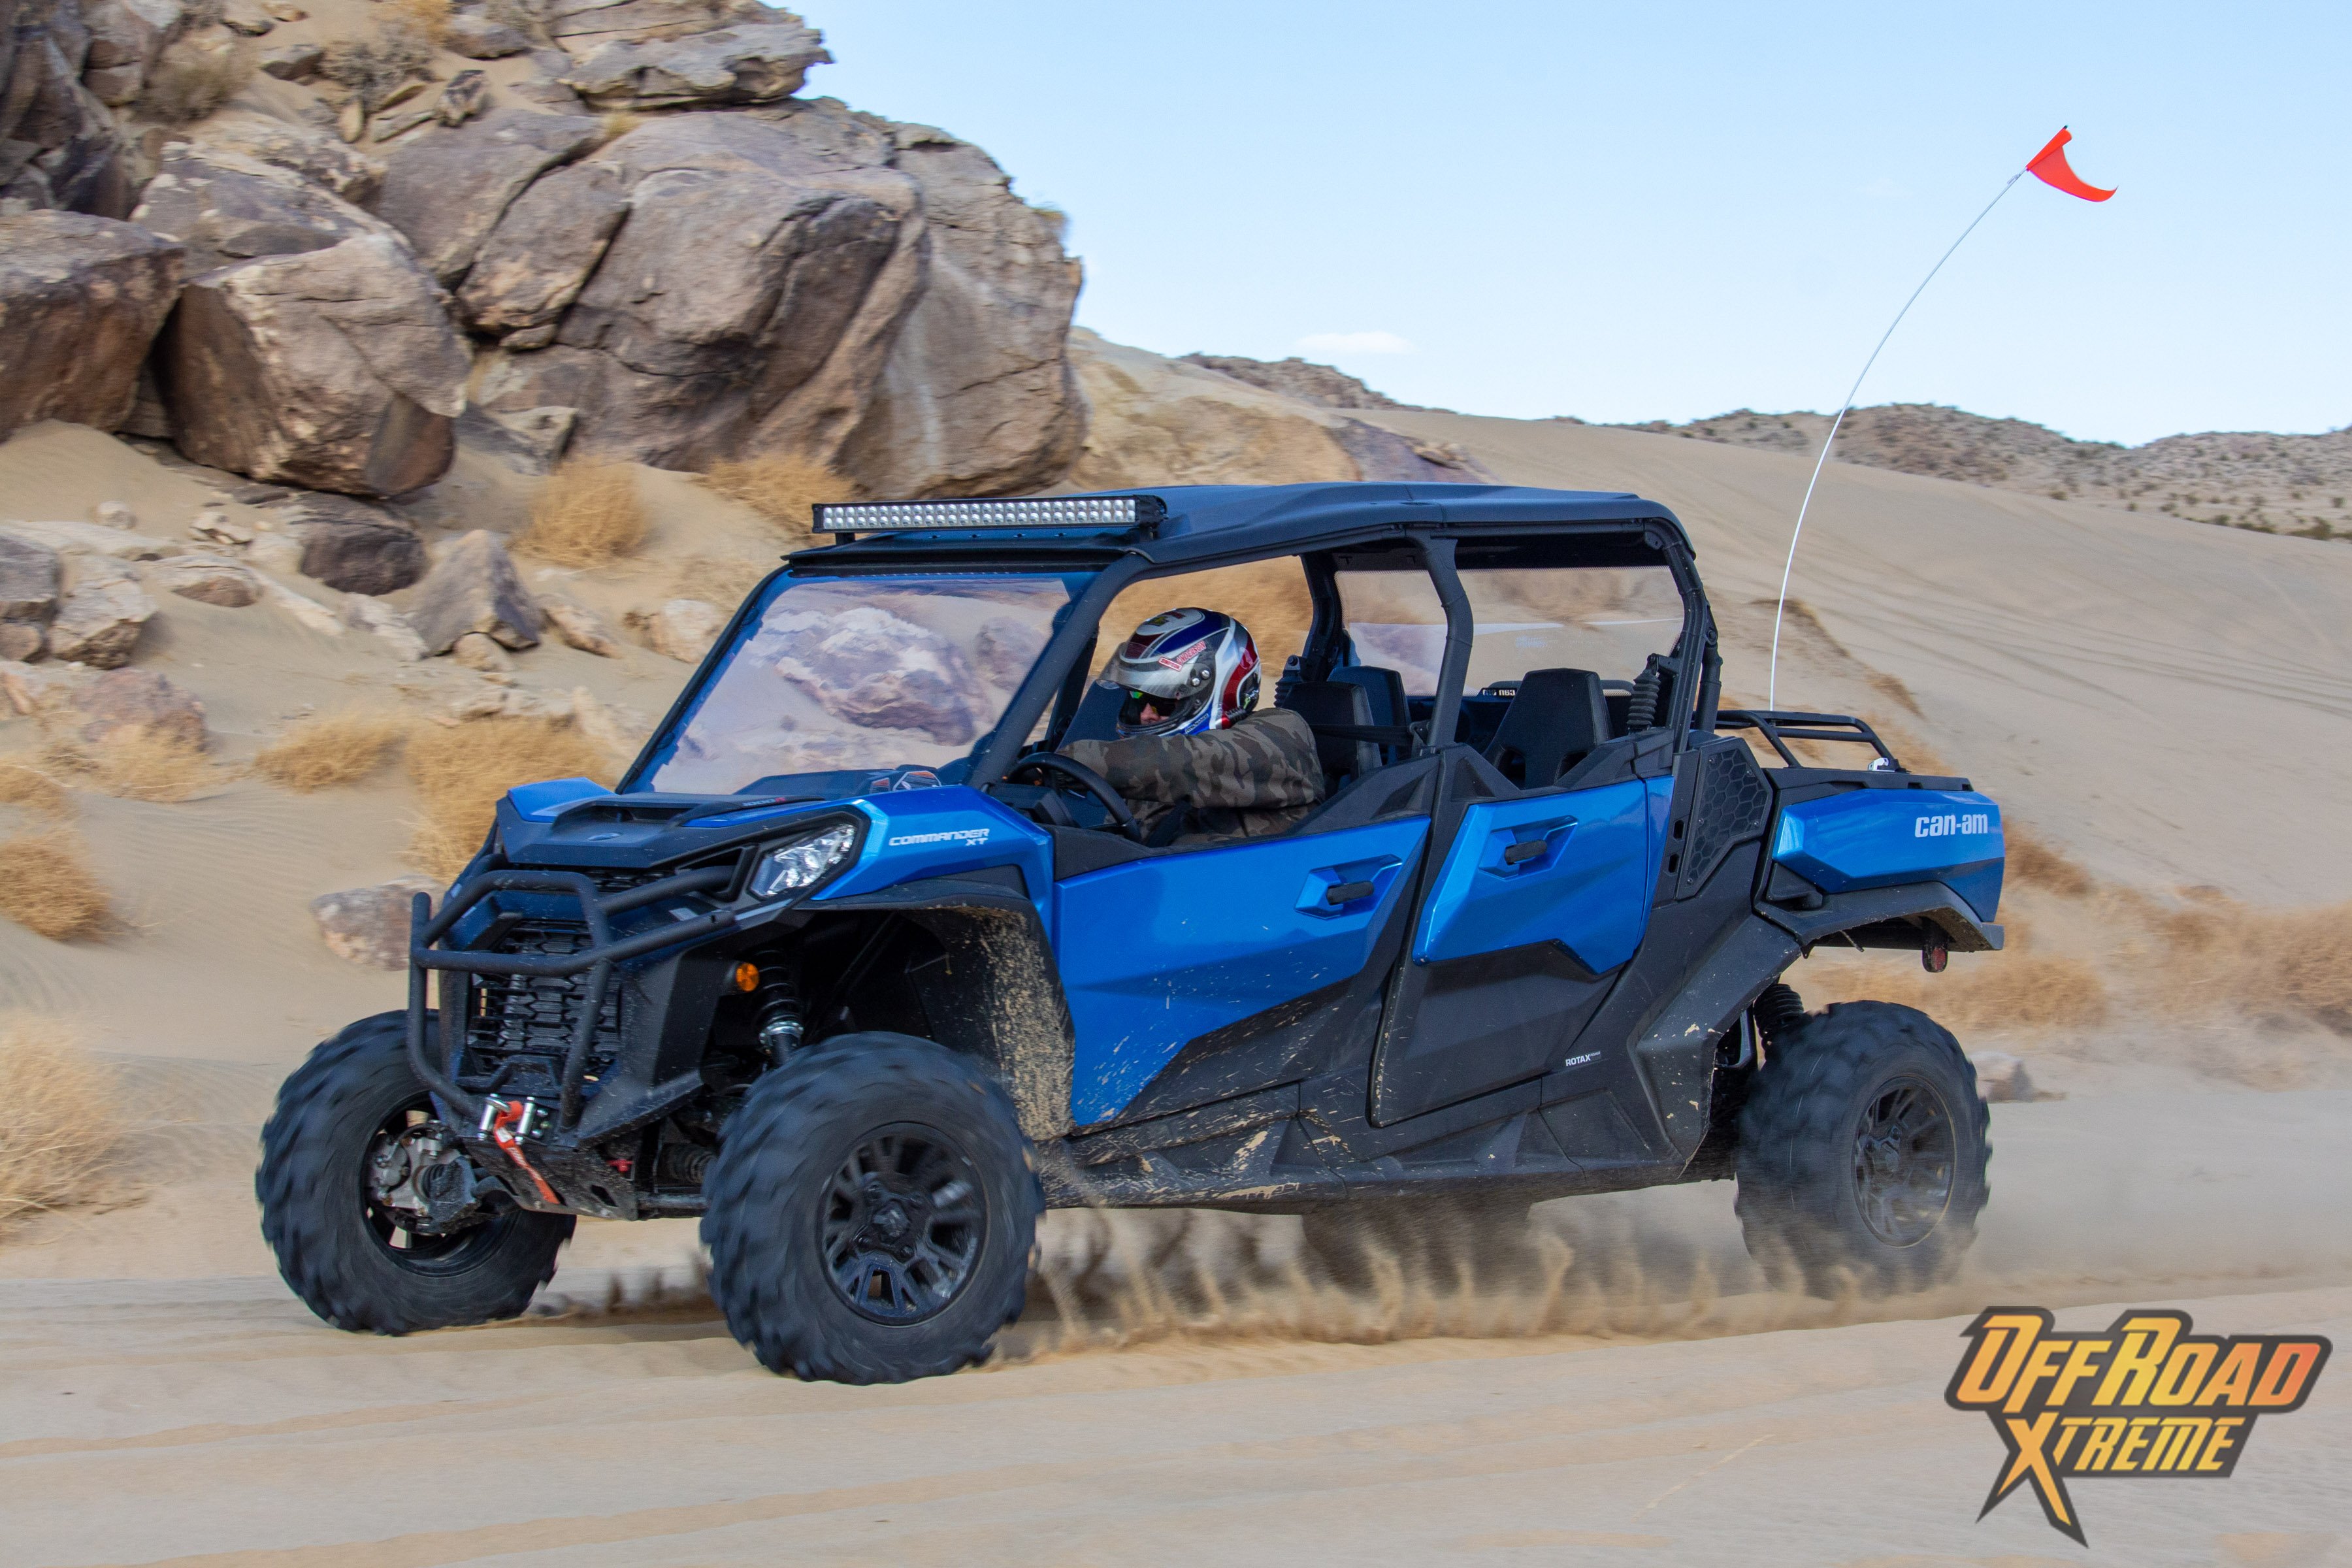 In Command: Can-Am Commander XT 1000R Test And Review, 56% OFF